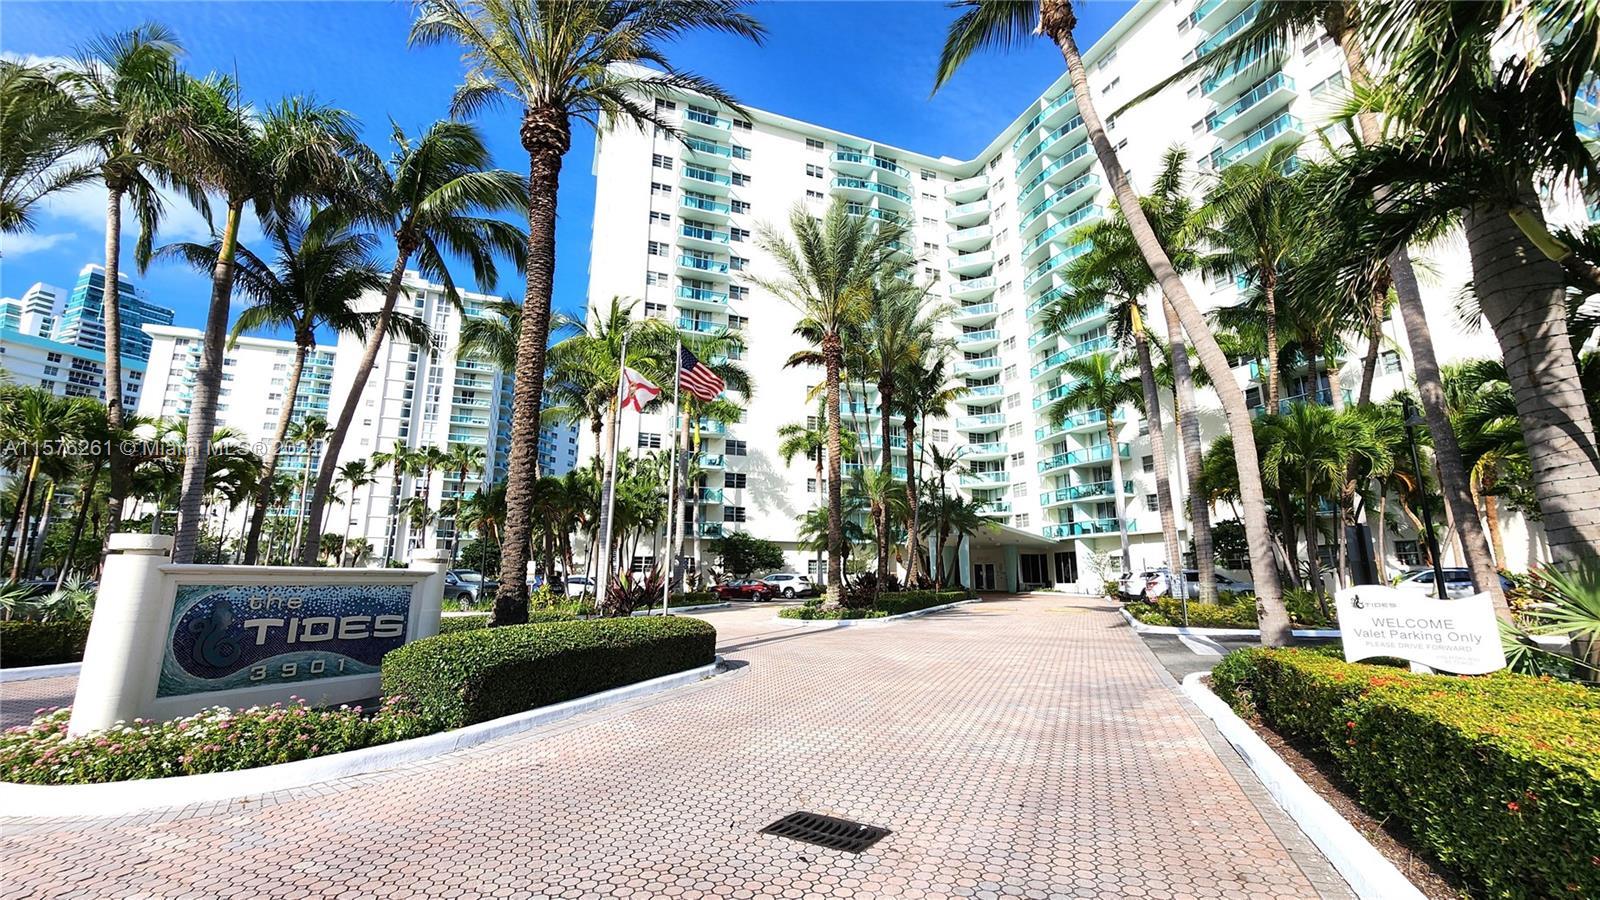 Photo of 3901 S Ocean Dr #5Z in Hollywood, FL